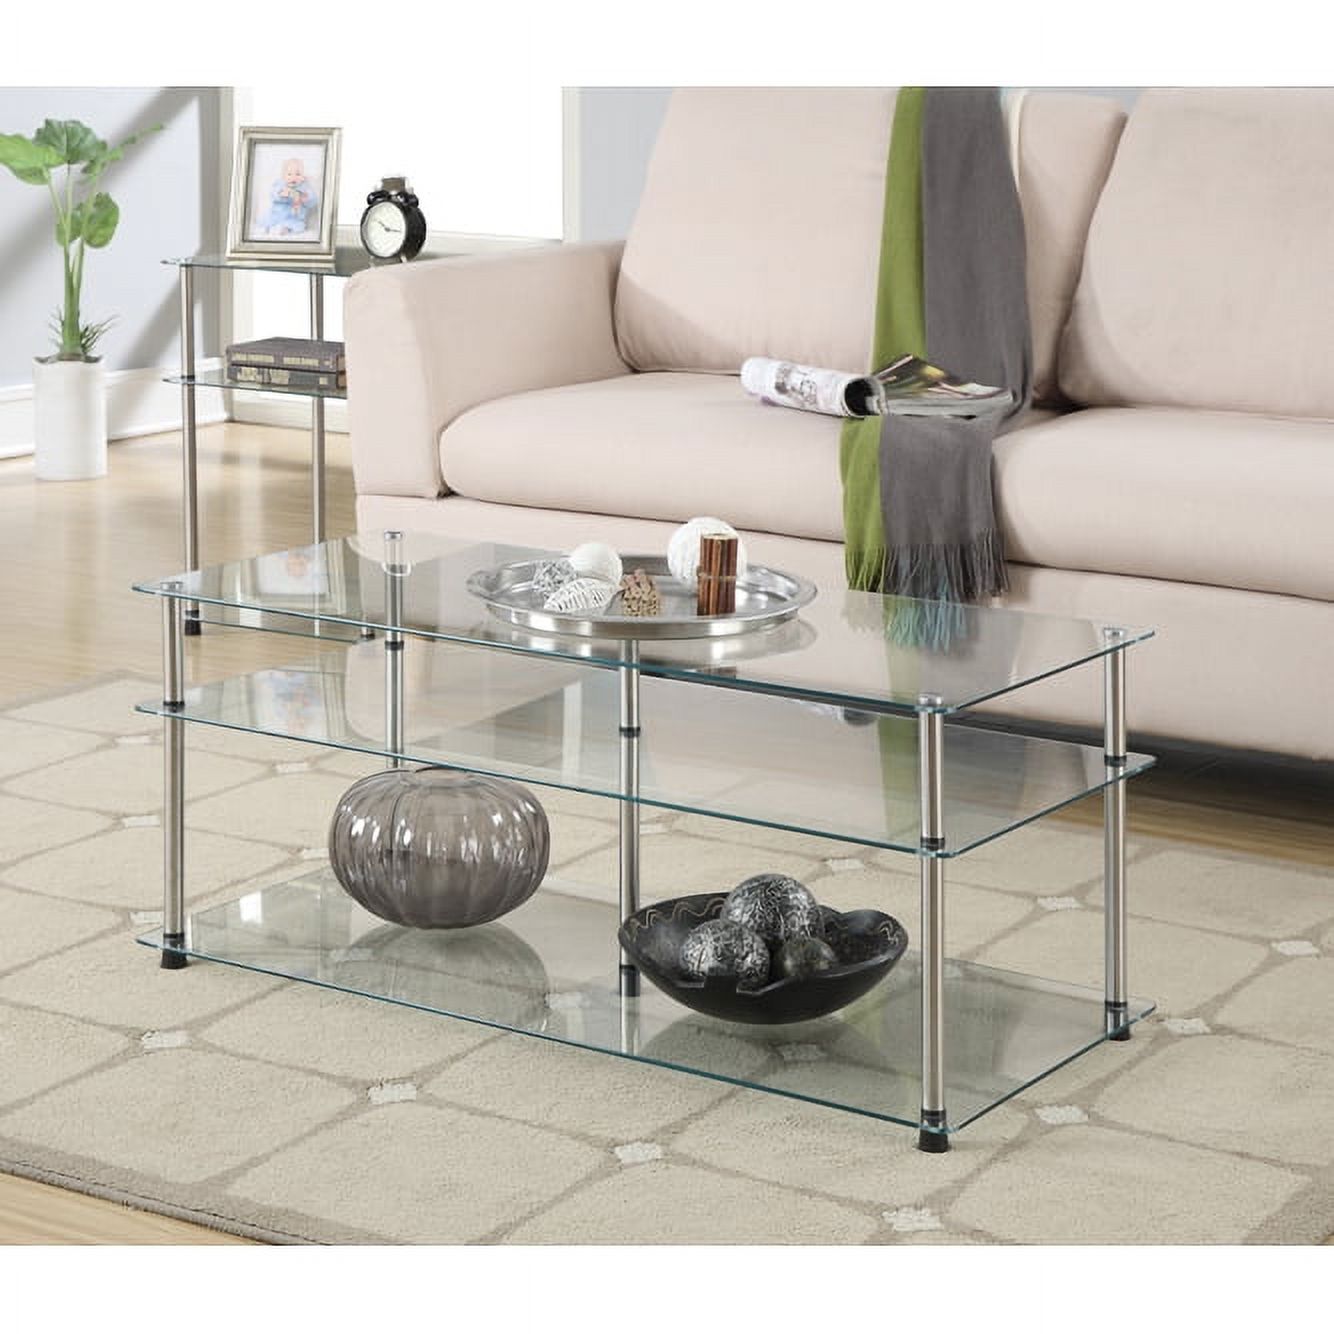 Designs2Go Classic Glass 3 Tier Coffee Table - image 2 of 2